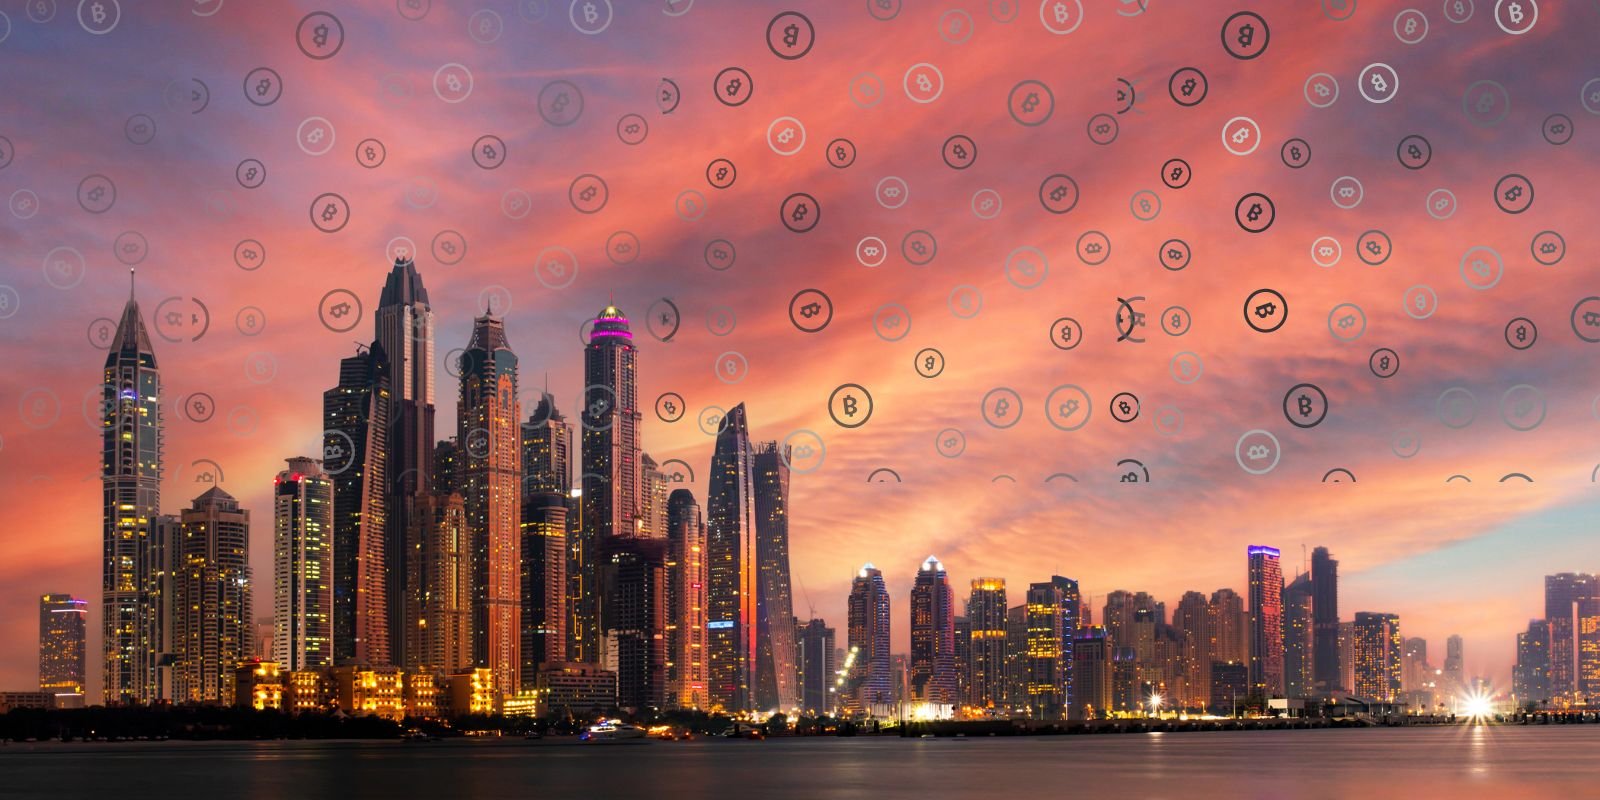 How Bitcoin Is Transforming the Landscape of Dubai